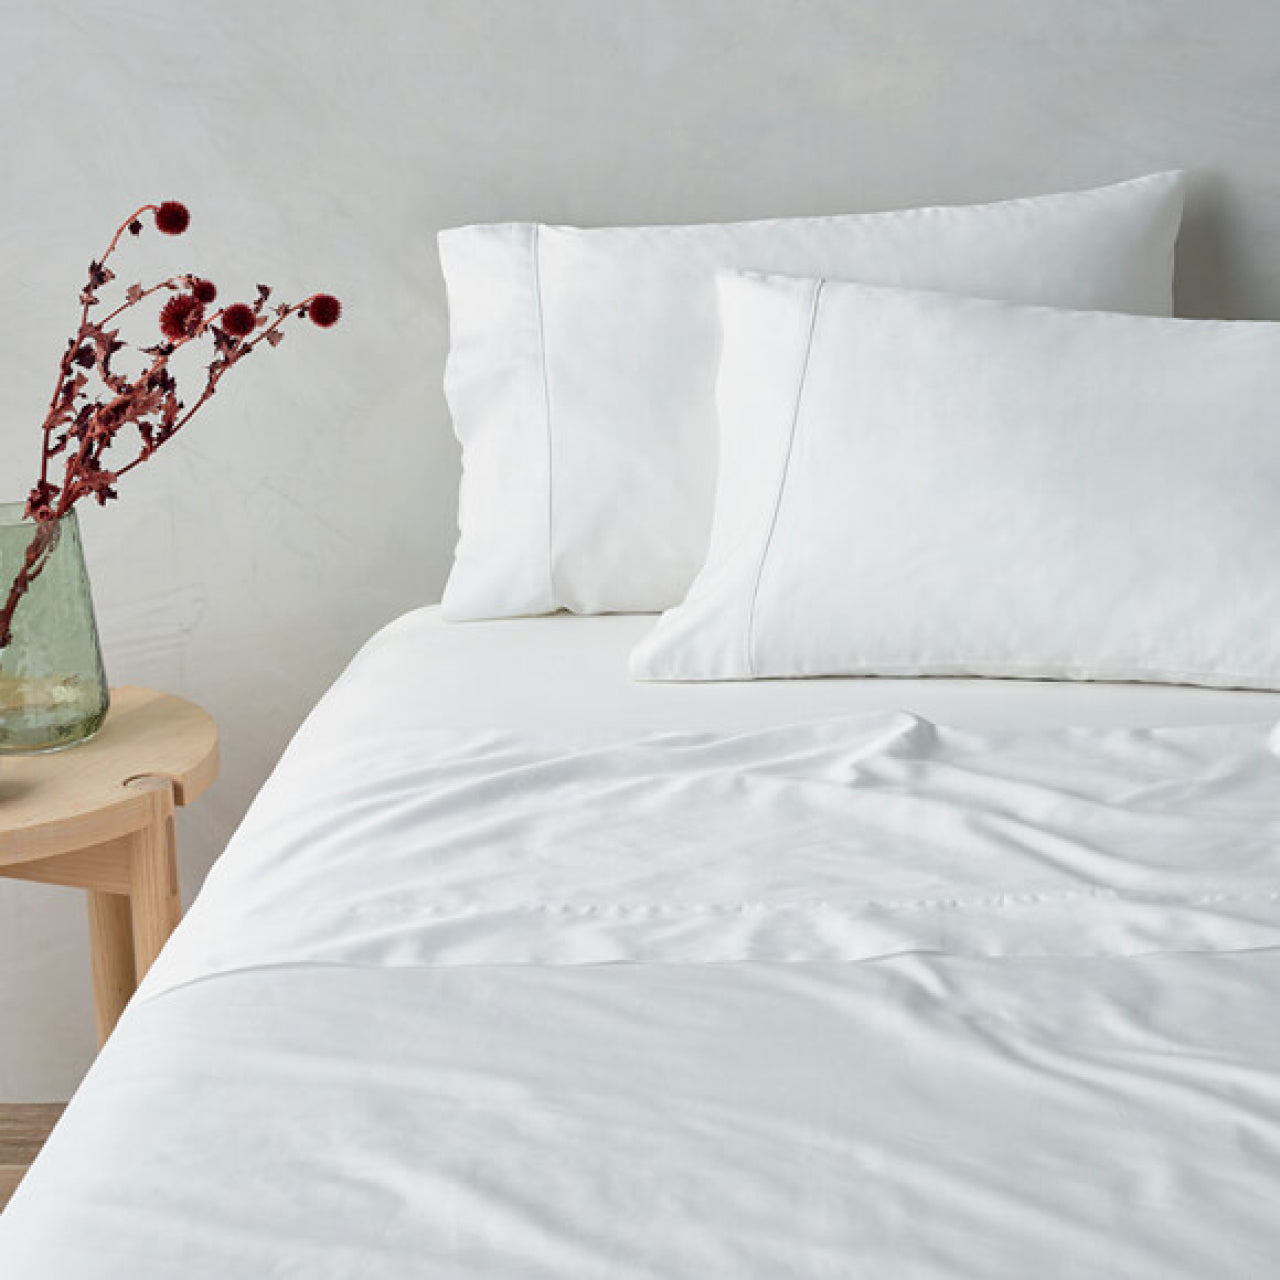 Lifestyle shot of Cotton White Sheets on bed